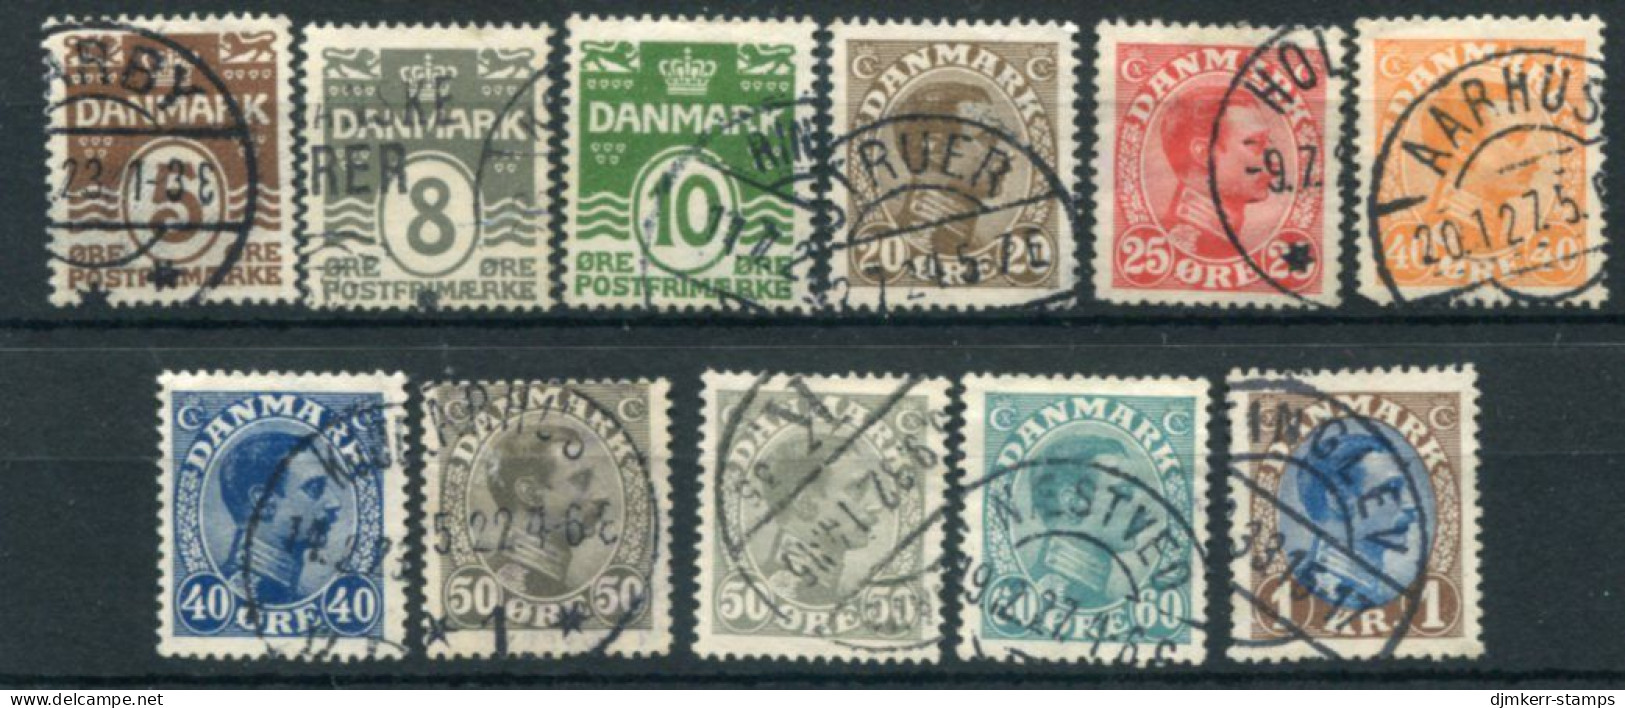 DENMARK 1921-22 Numeral And King Christian X Definitives Used .  Michel 118-28 - Used Stamps